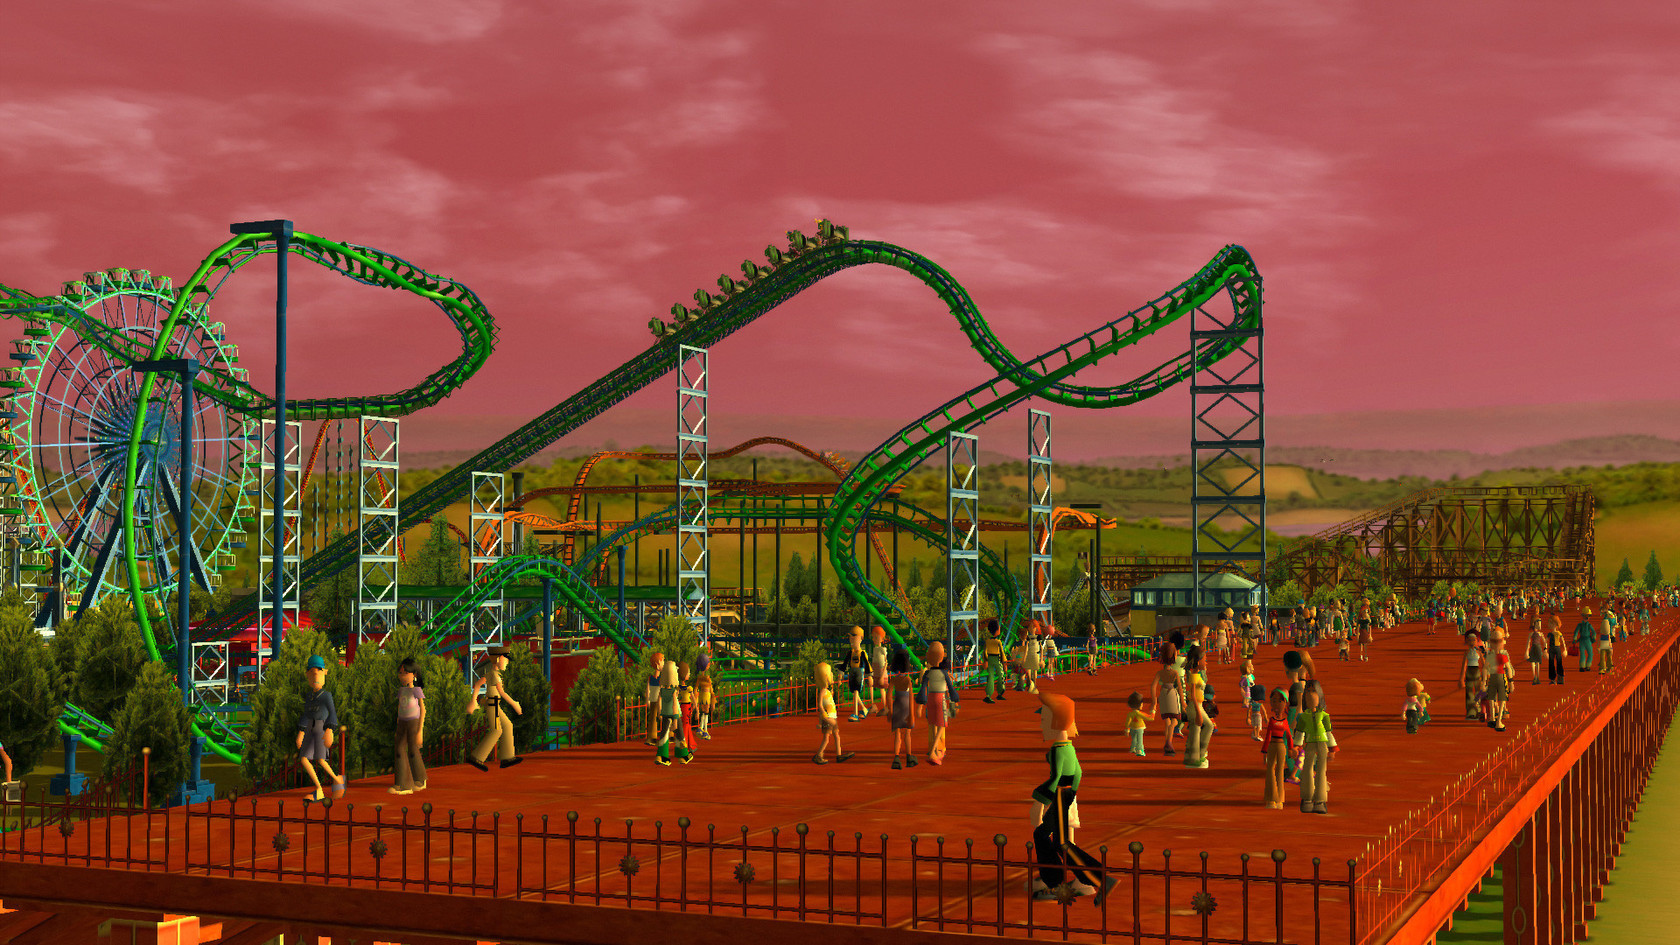 Get Rollercoaster Tycoon 3 For FREE If Downloaded by 4pm Oct, 1